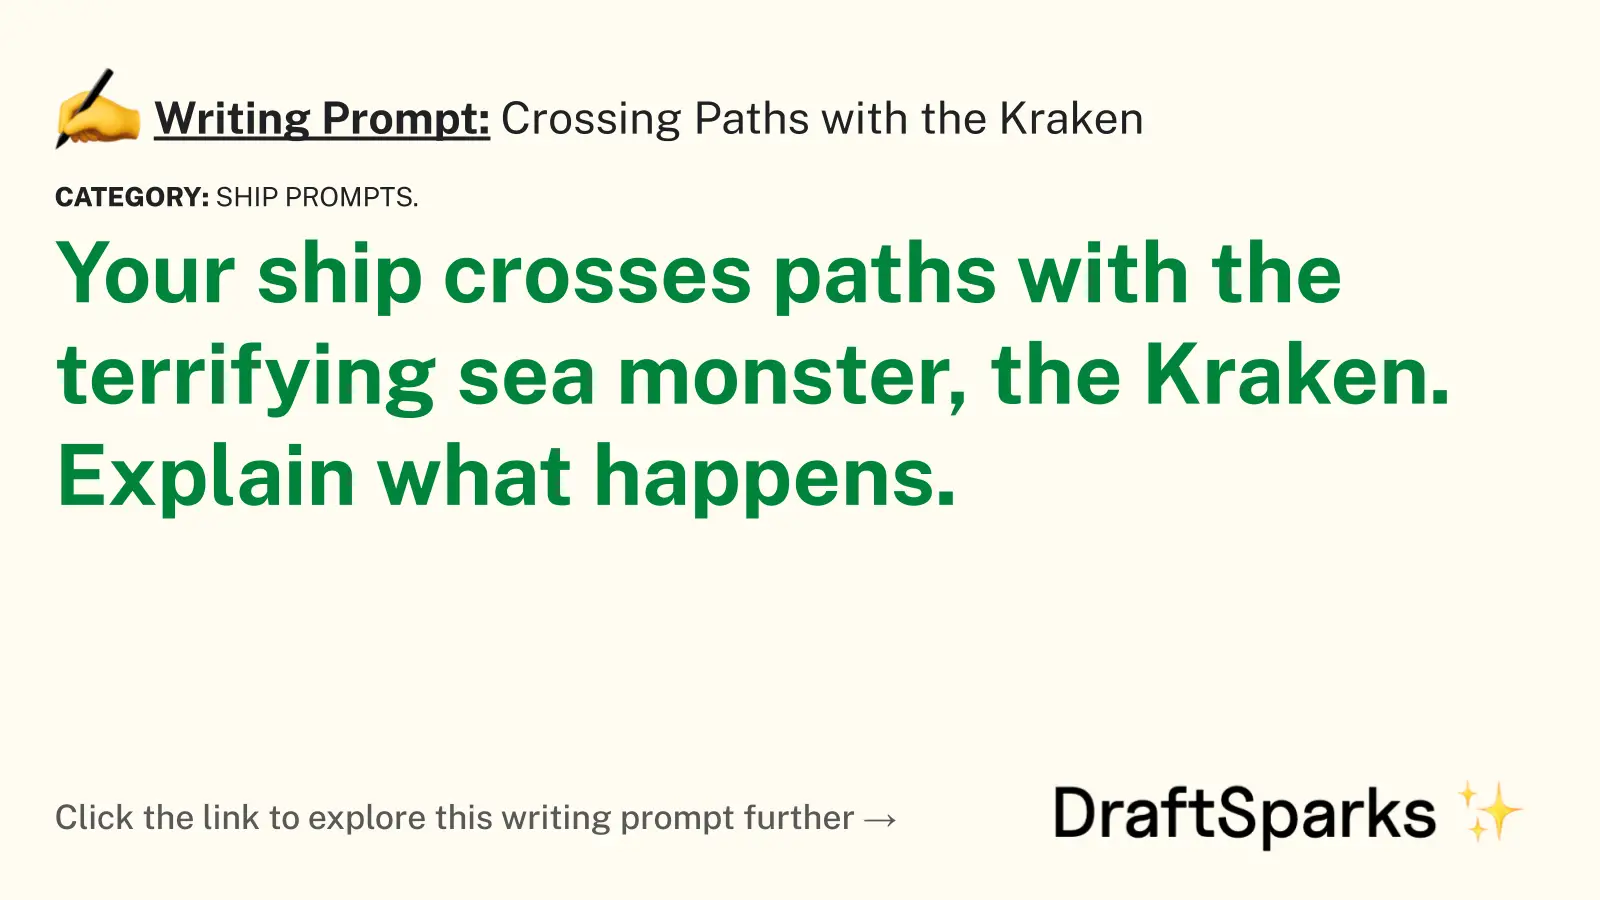 Crossing Paths with the Kraken